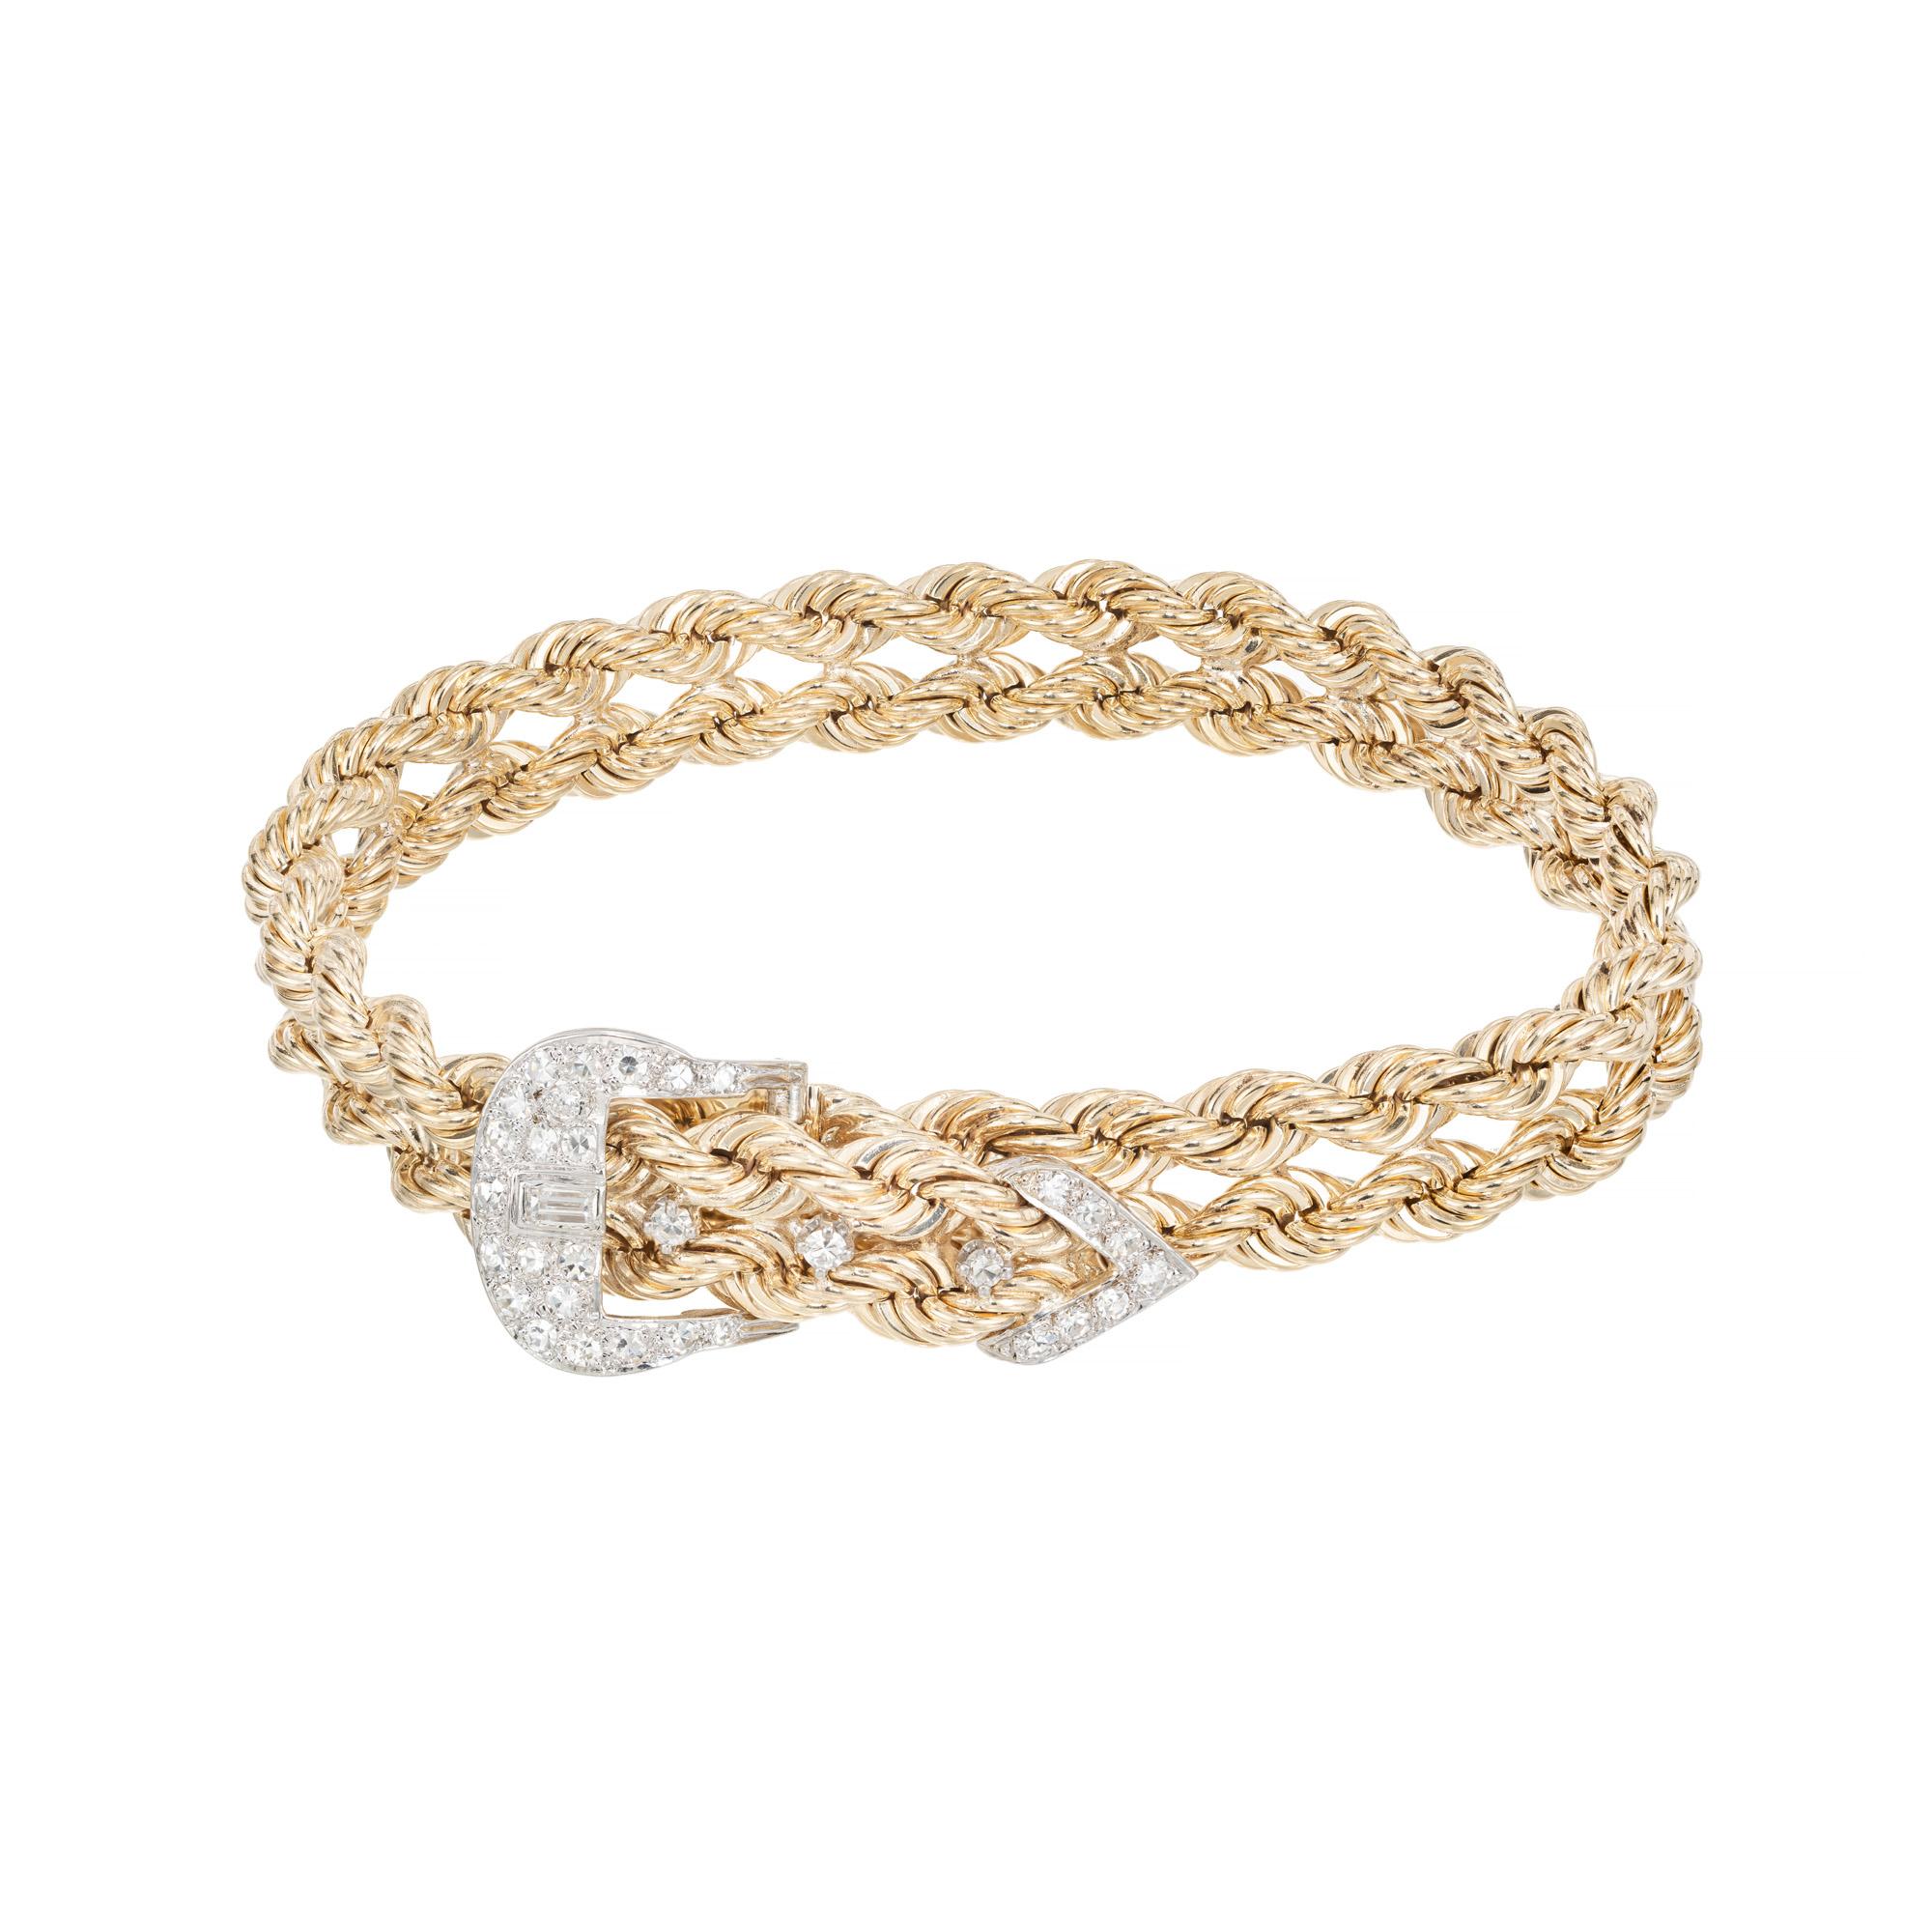 Double rope diamond bracelet. A step back in time. 1960's 14k yellow gold rope bracelet with a 14k white gold buckle and V tip. set with 31 single cut pave set diamonds totaling .34cts. One single baguette diamond sits in the center of the buckle